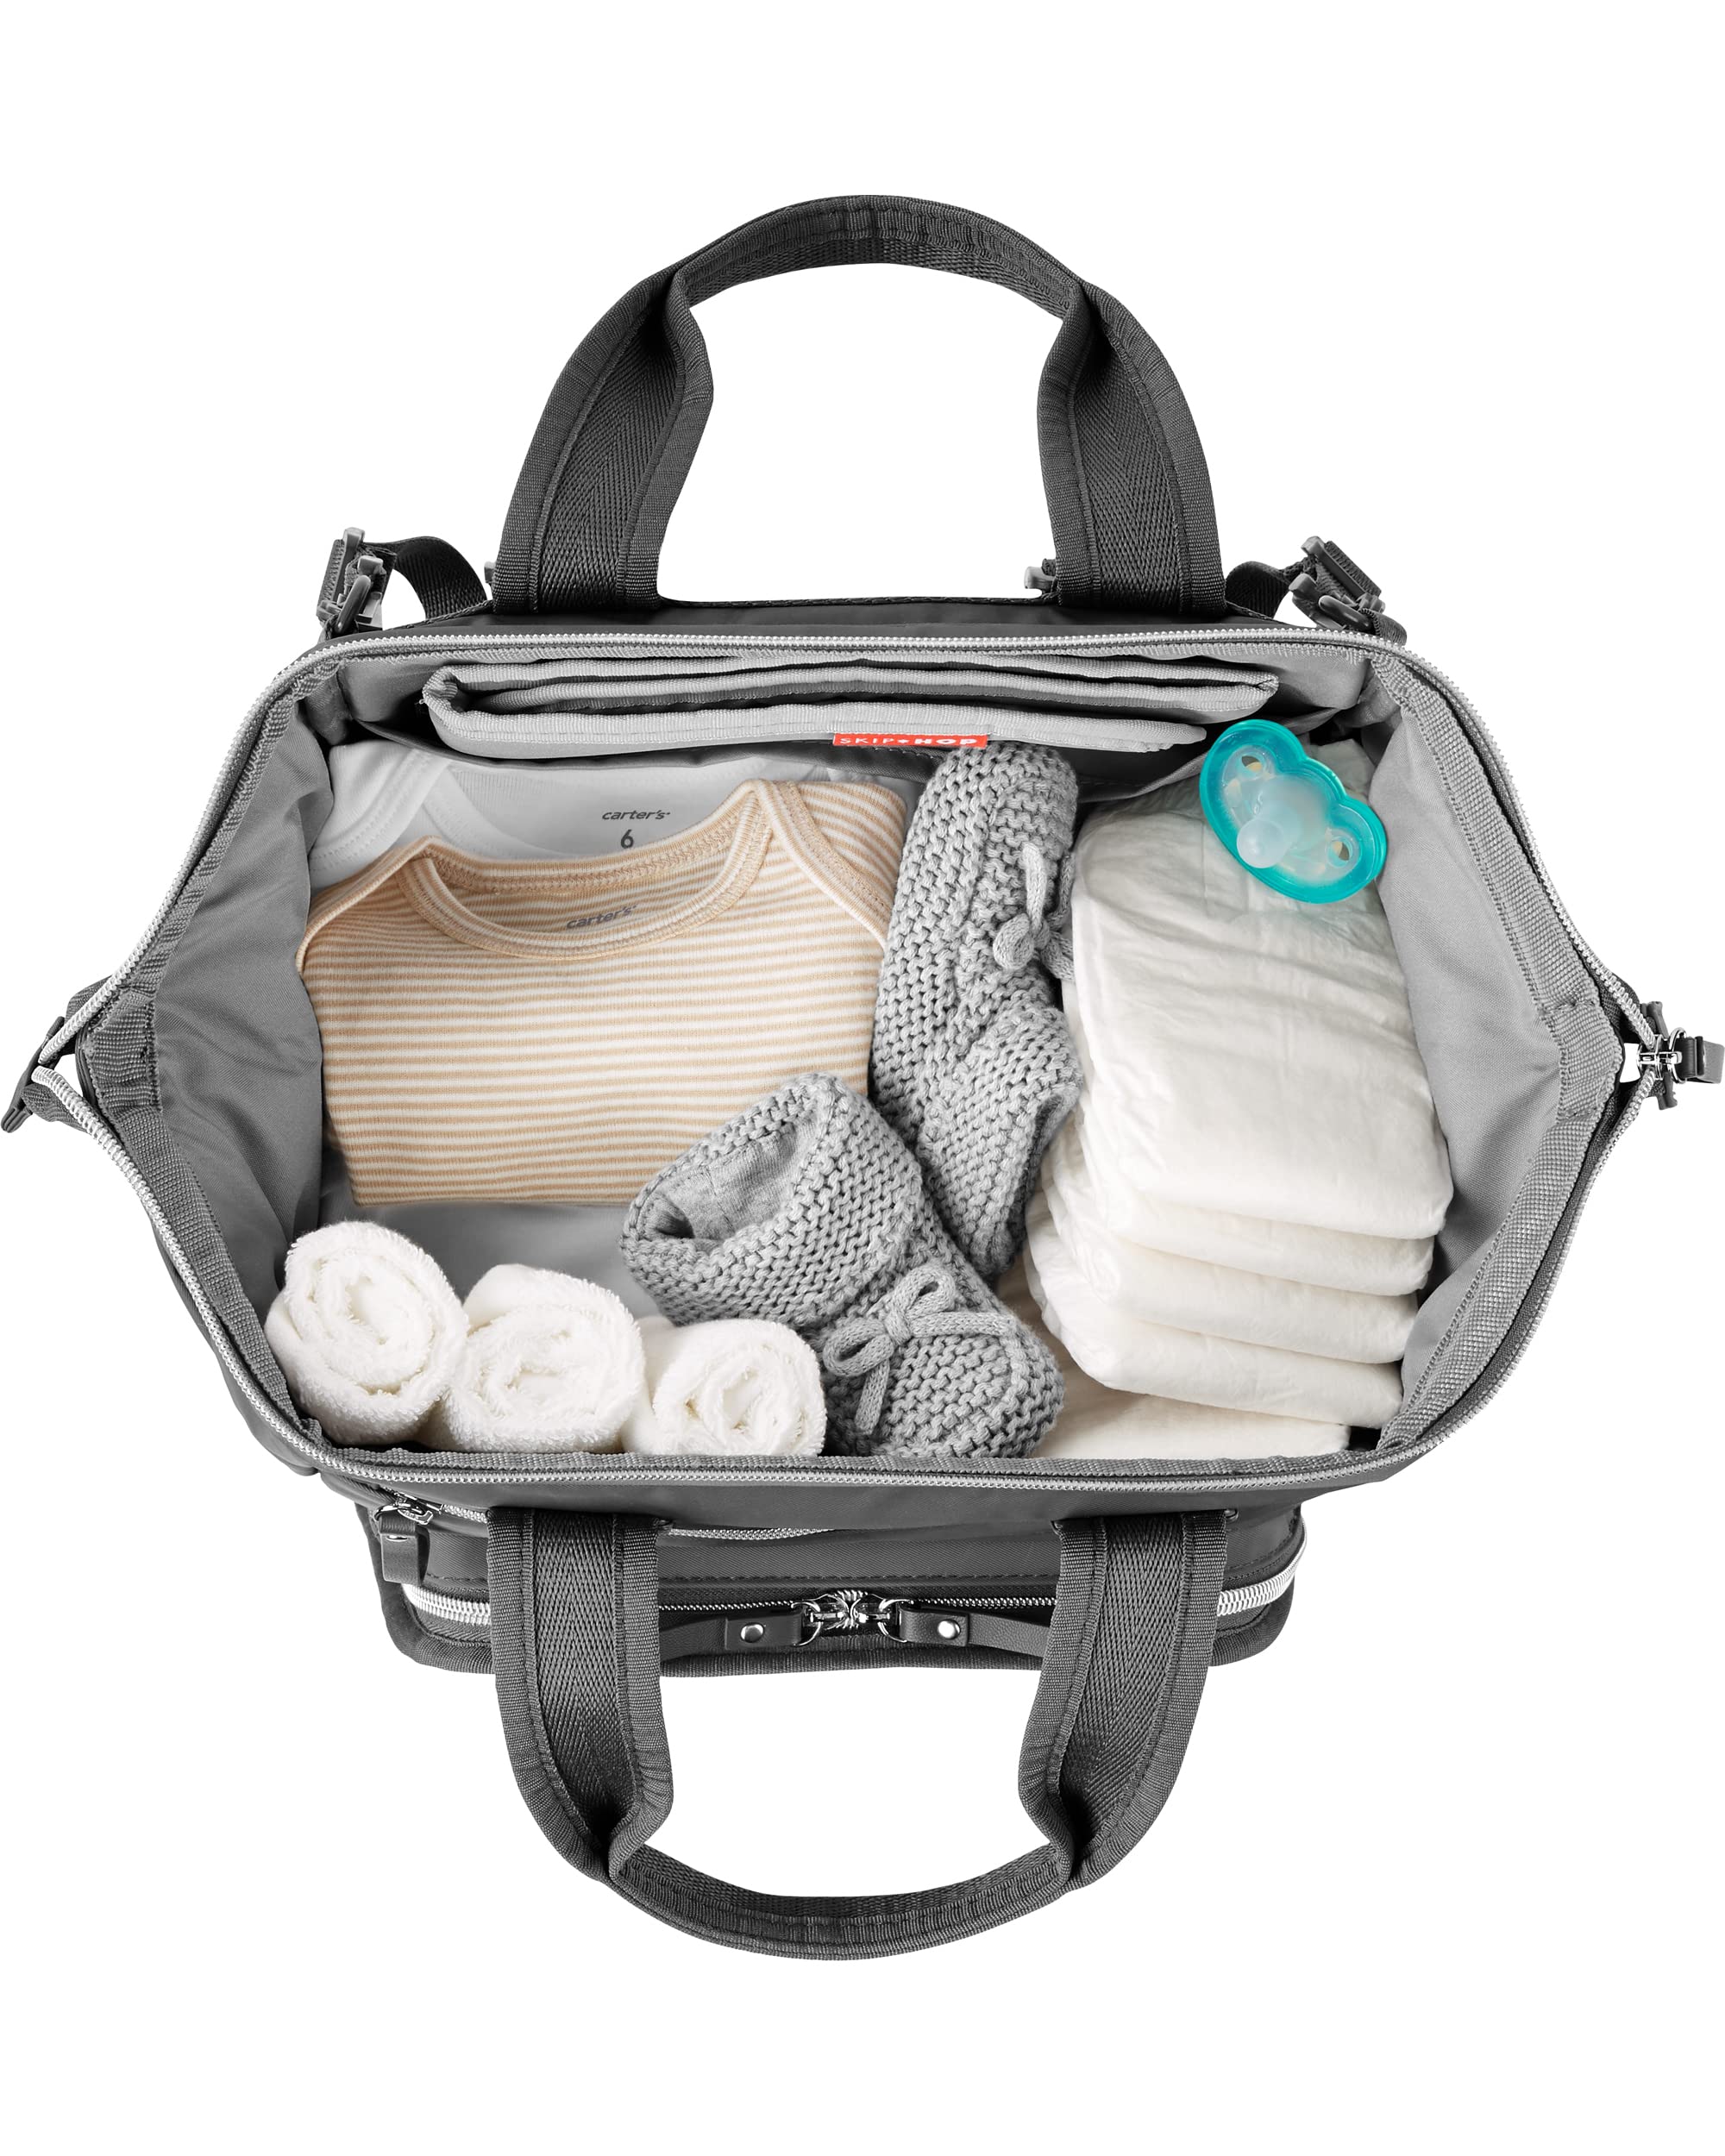 Skip Hop Diaper Bag Backpack: Mainframe Large Capacity Wide Open Structure with Changing Pad & Stroller Attachement, Charcoal